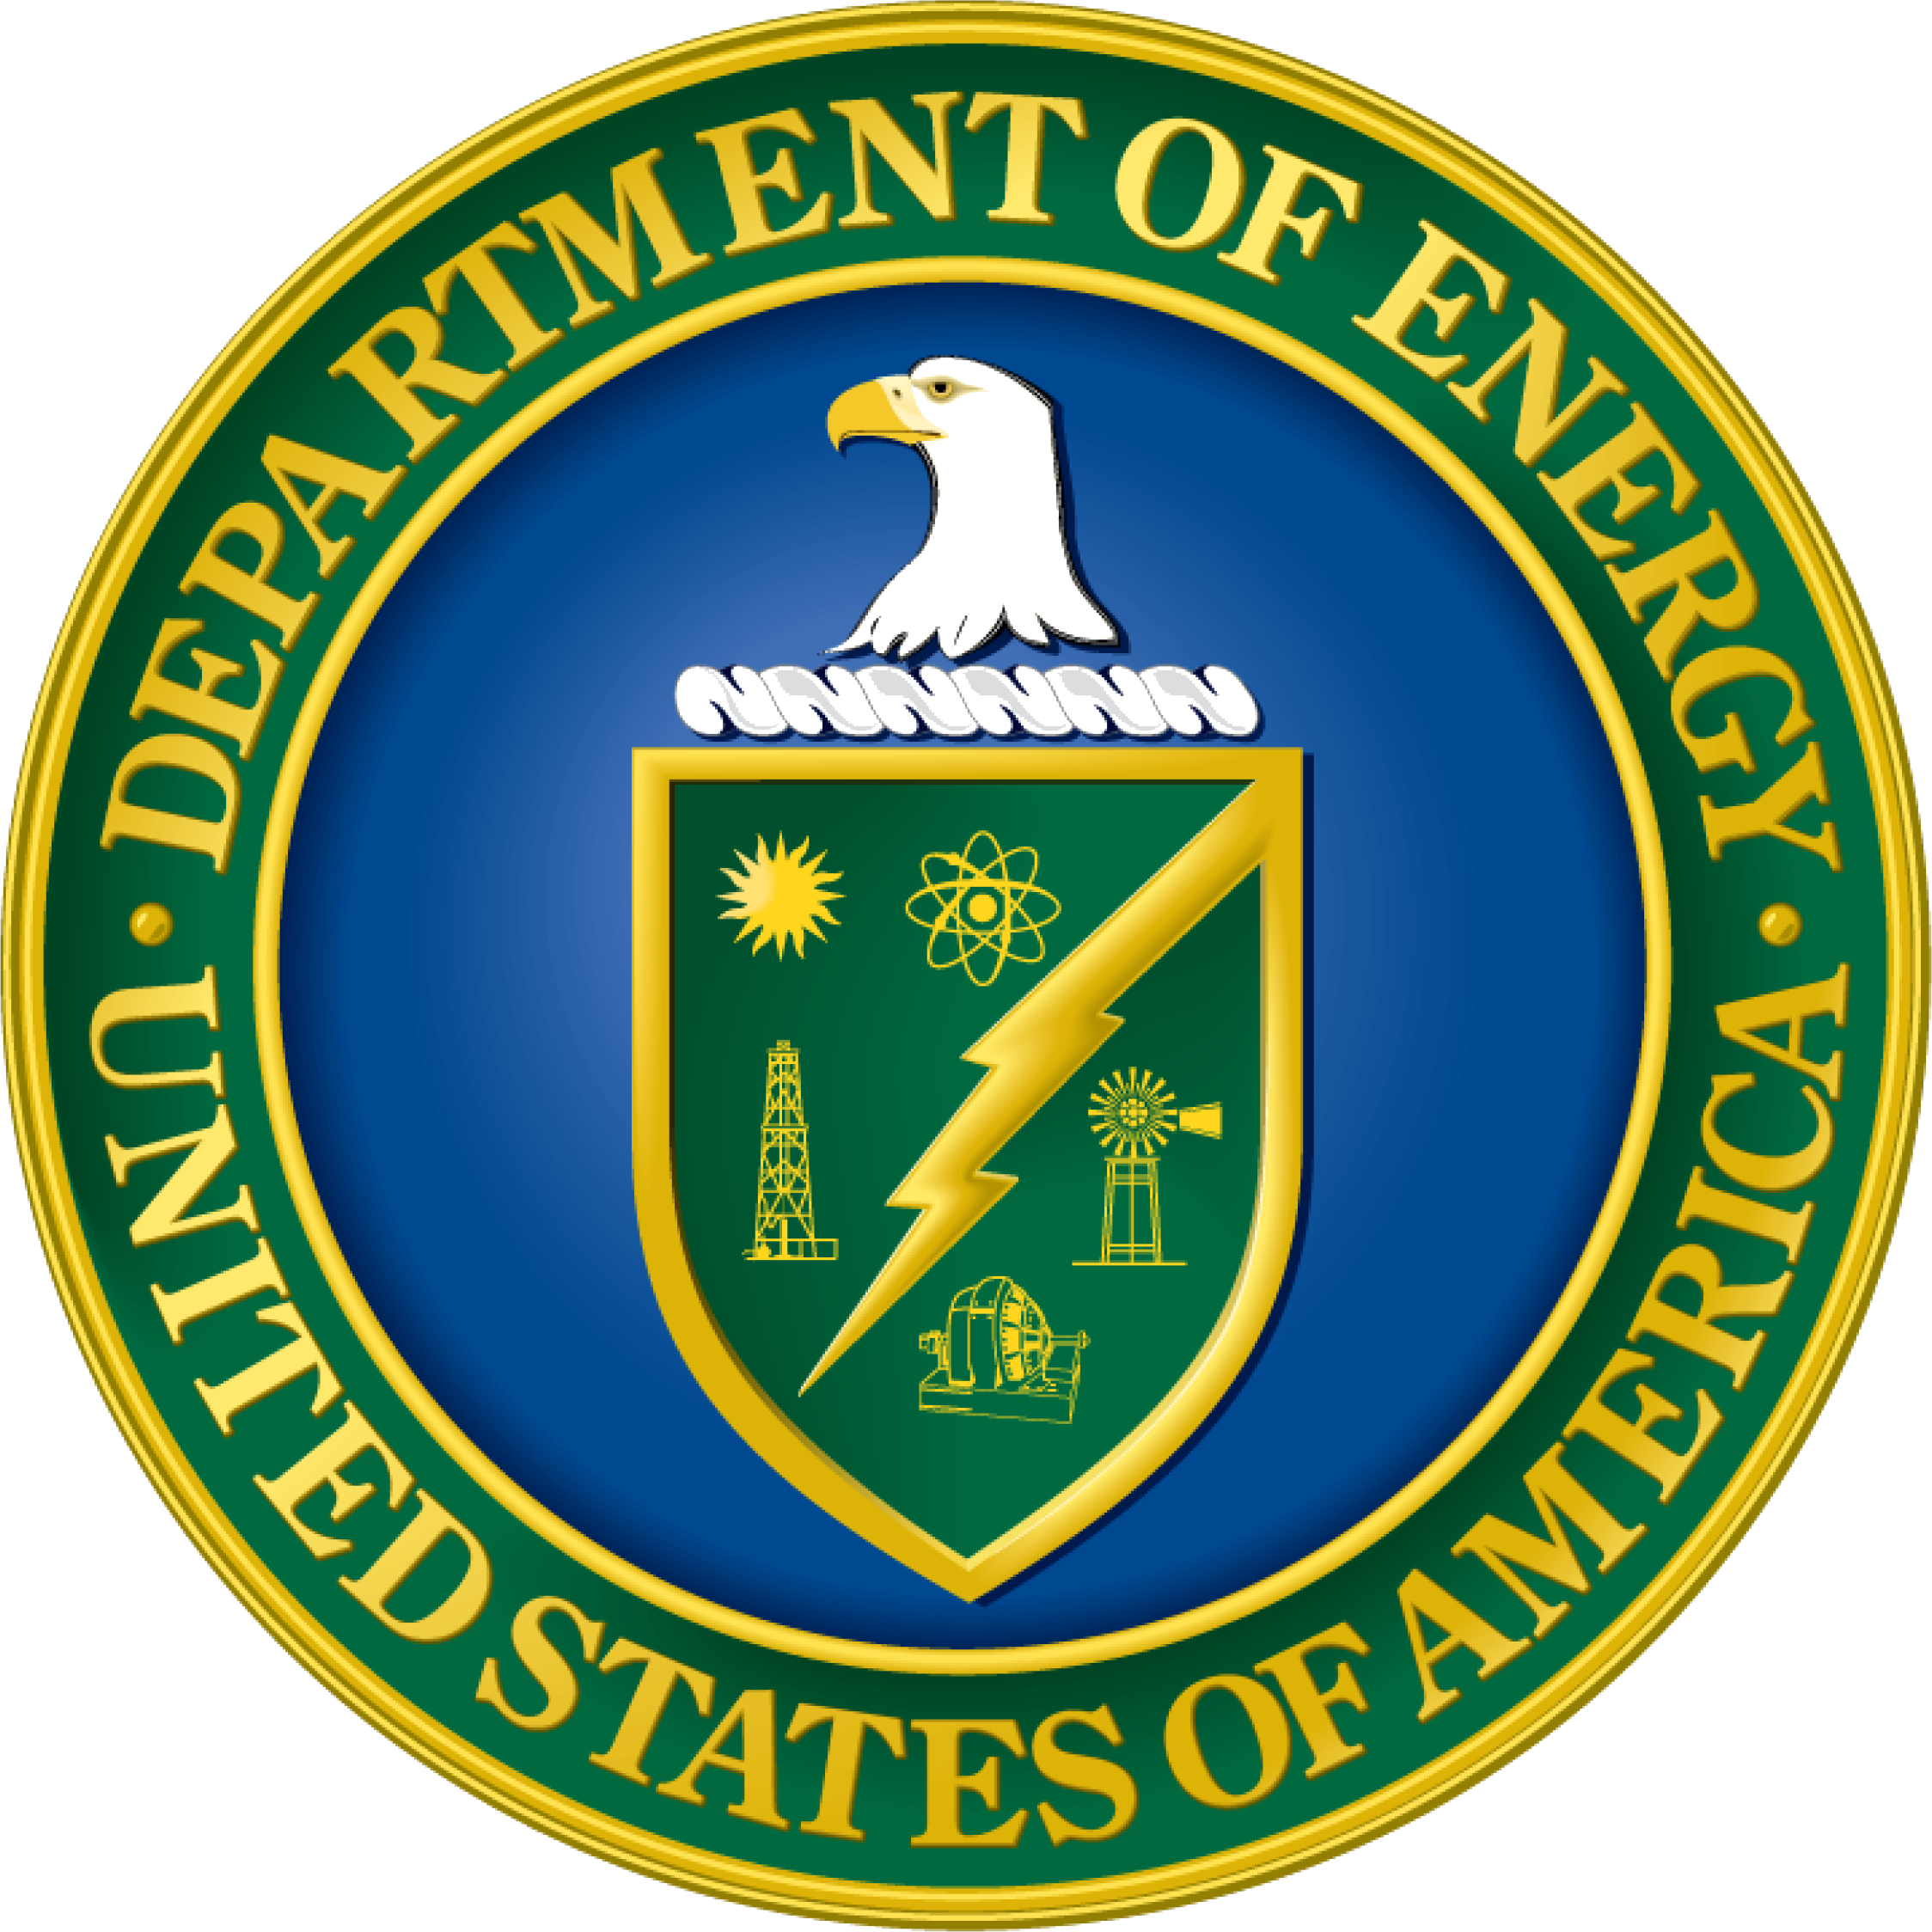 The Department of Energy, Office of Environmental Management